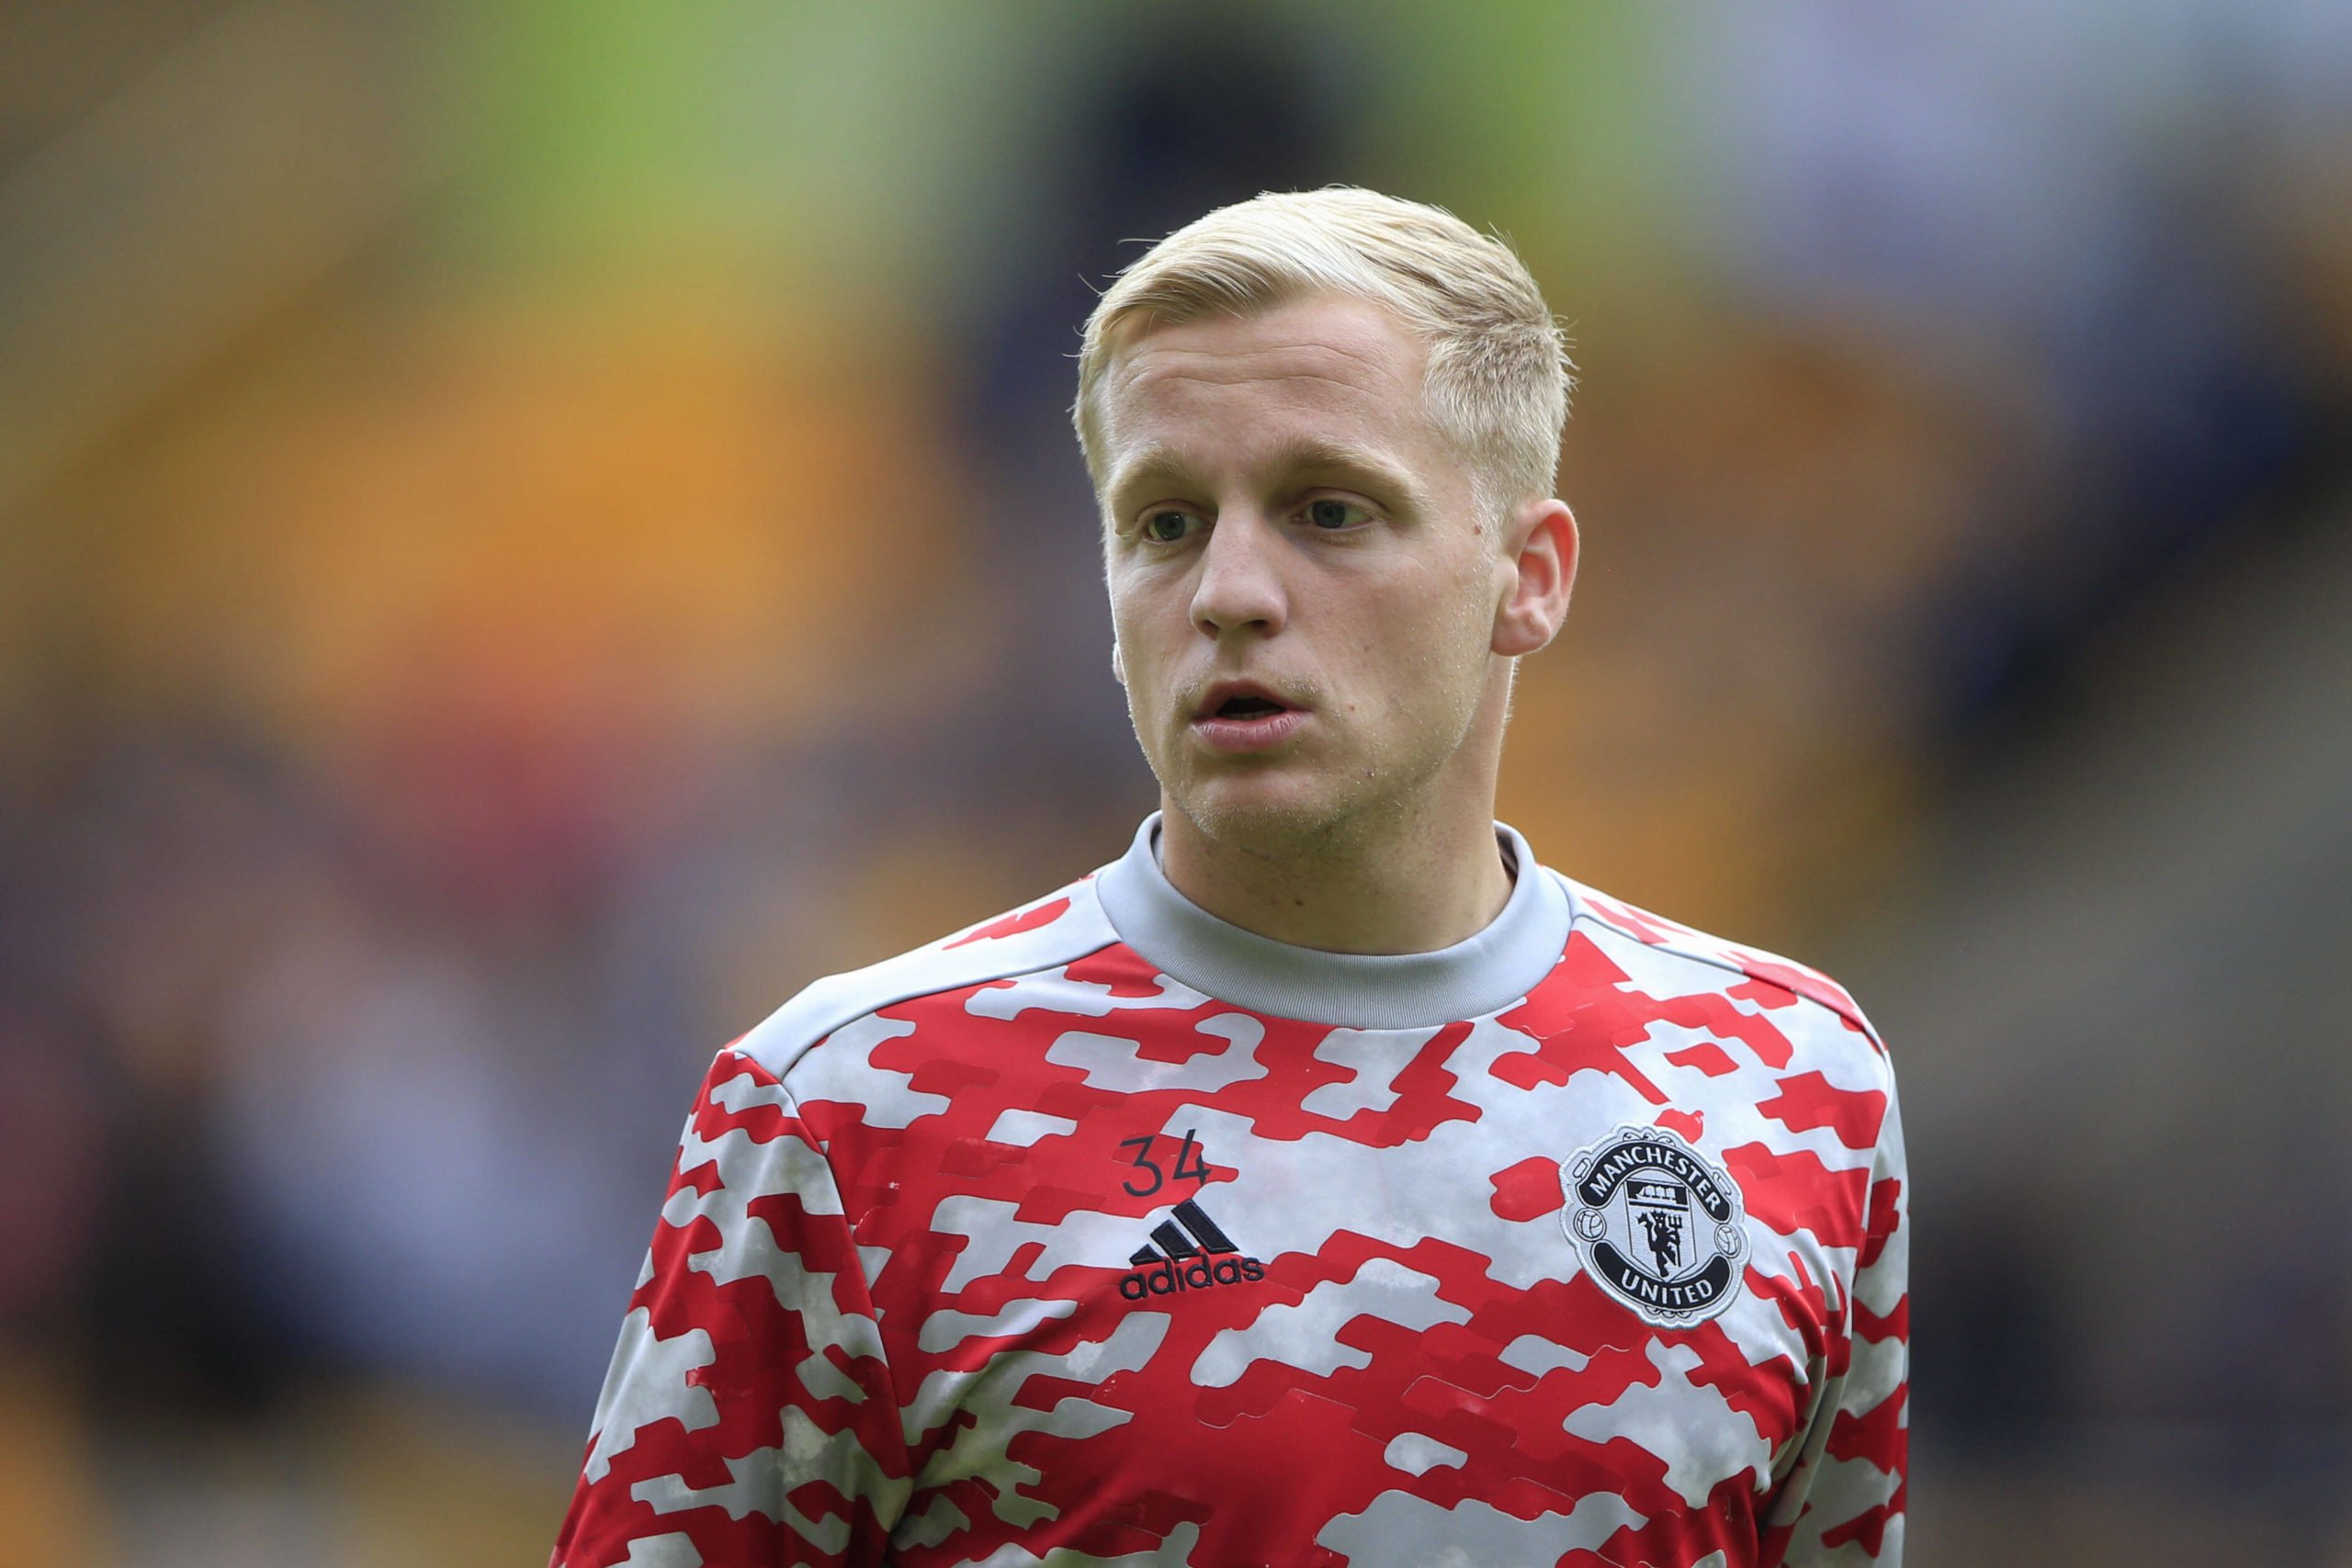 Manchester United Predicted Lineup Vs Newcastle United (Donny van de Beek can be seen in the picture)